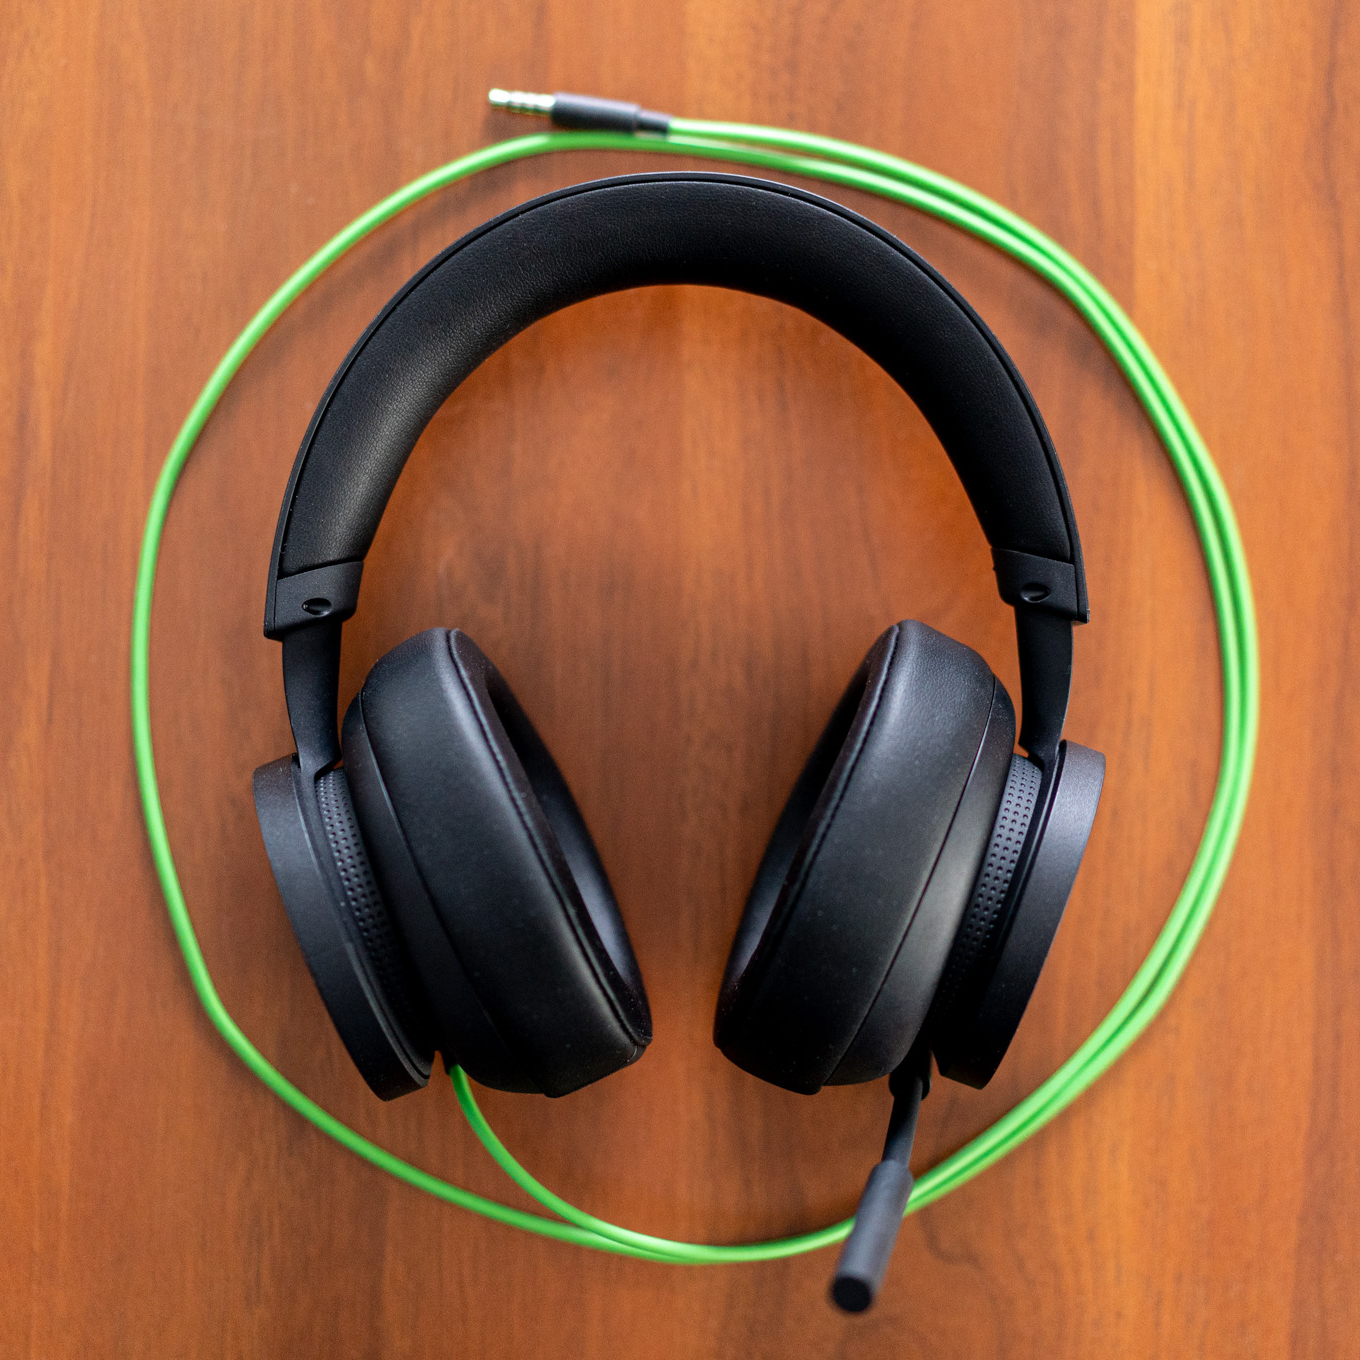 Xbox Stereo Headset review: affordable, wired, and works well Verge